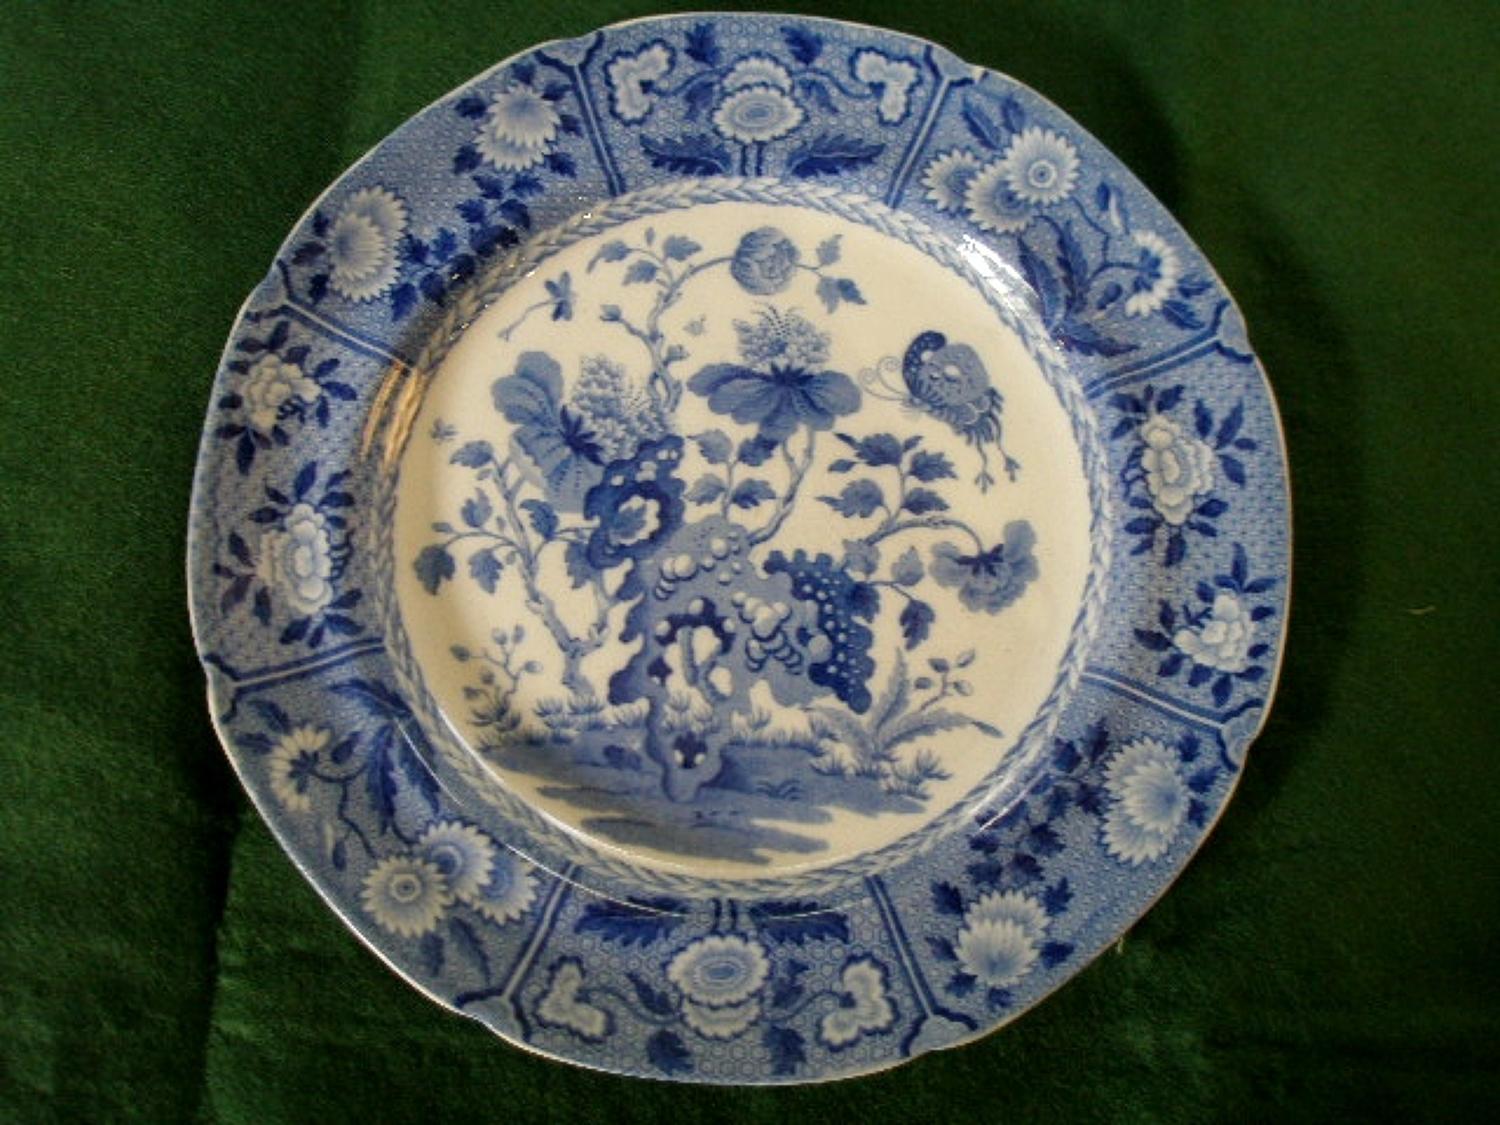 Spode India pattern transfer printed blue and white plate